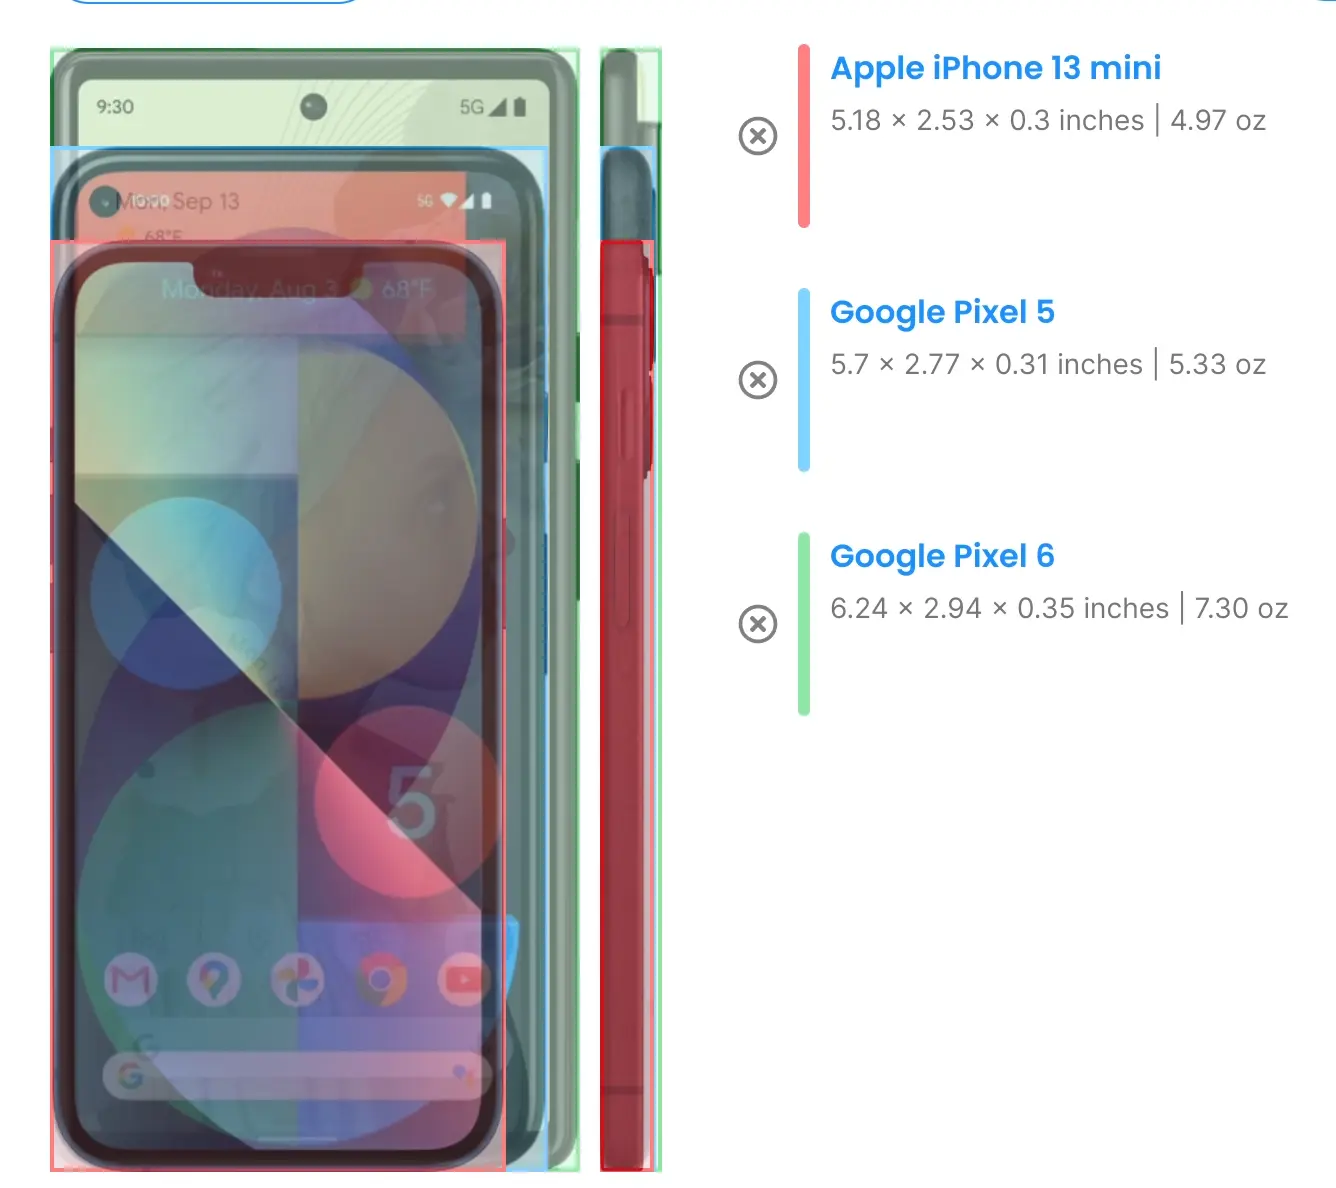 Extrapolating from this image, the future Pixel 10 will be roughly the size of California